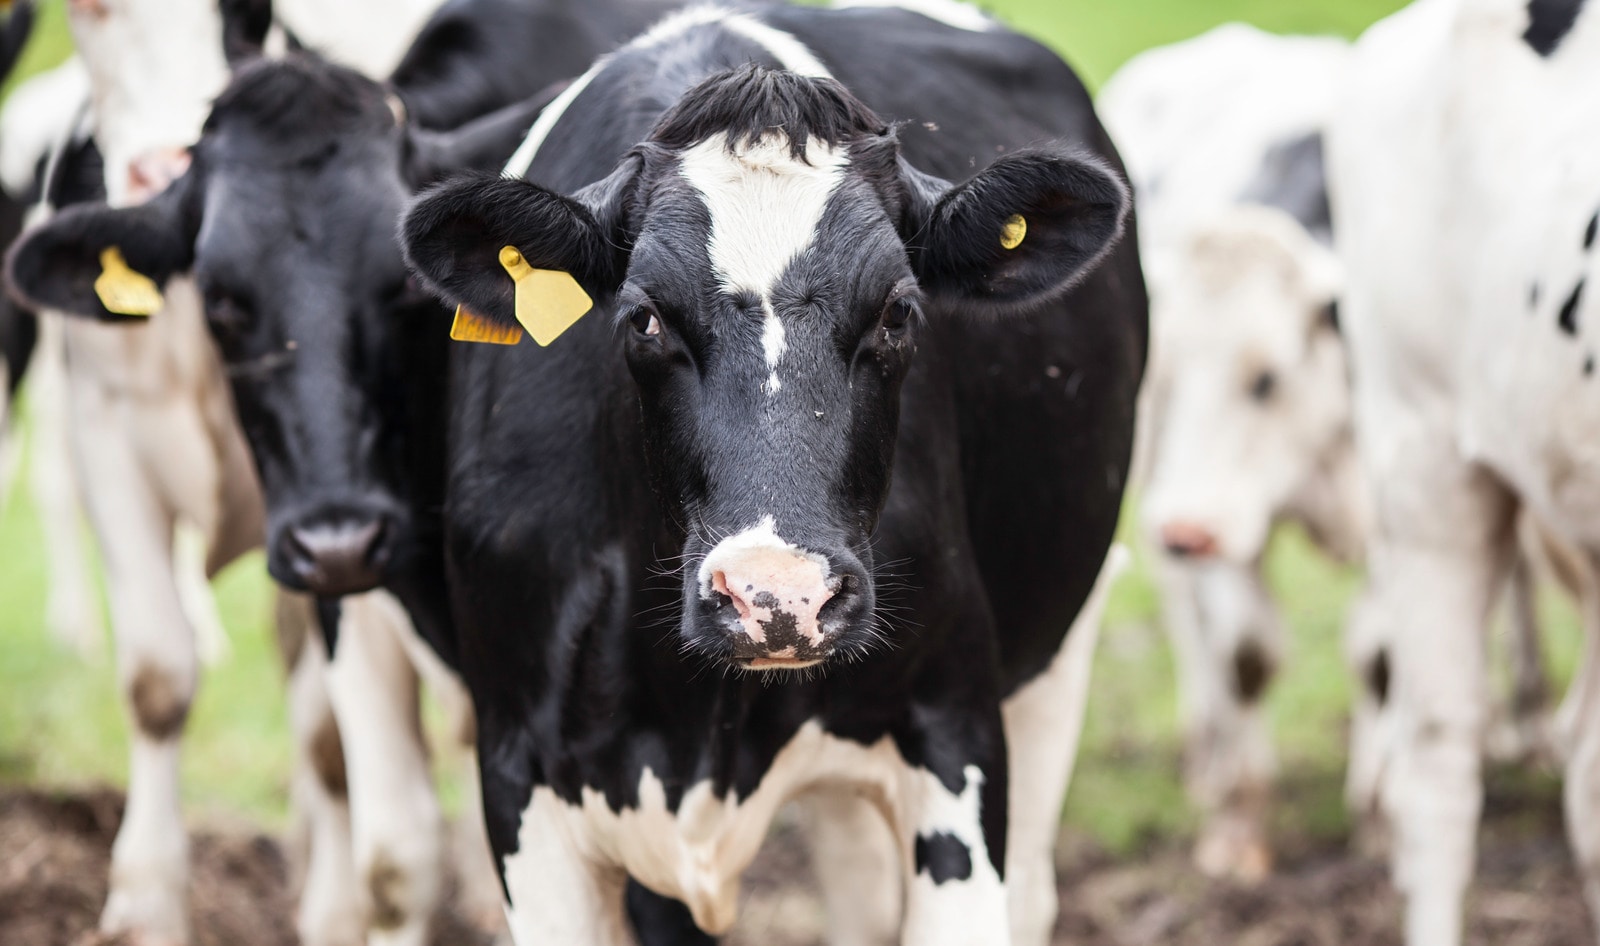 Report: UK Must Slash Meat and Dairy Production in Half to Hit Climate Goals by 2050